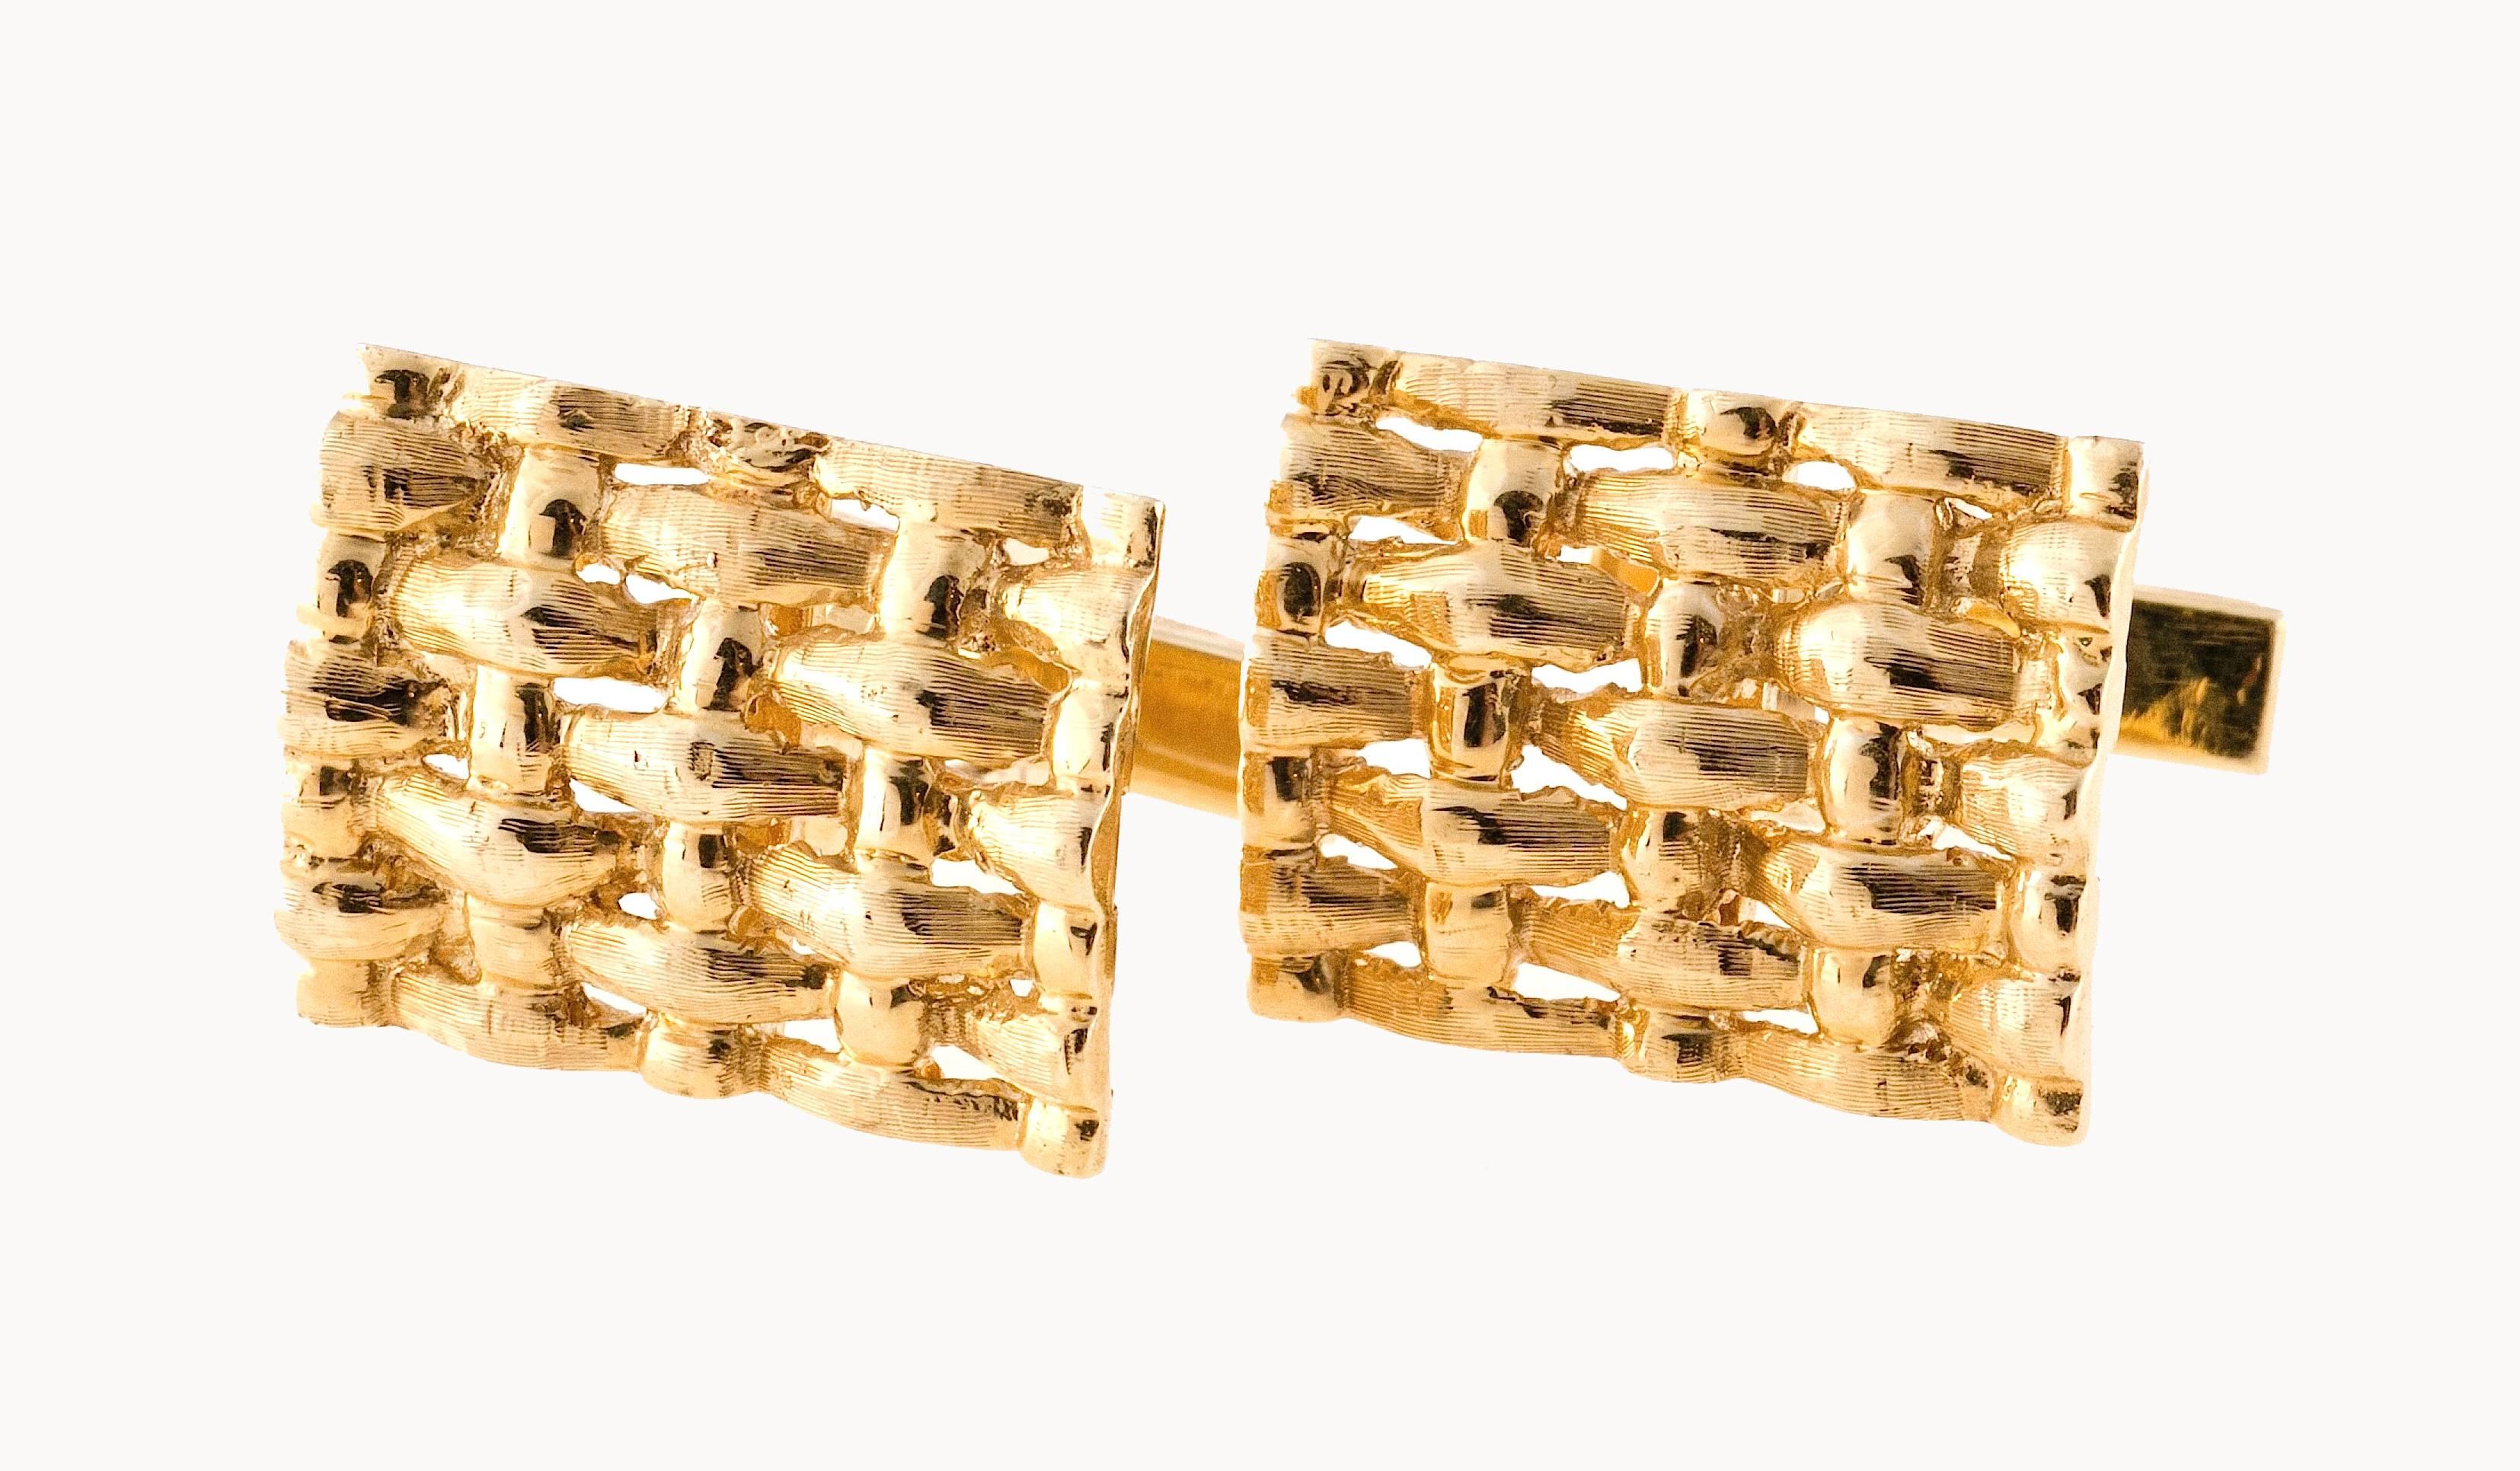 Domed rectangular woven textured solid 14k cuff links. Circa 1960’s.

14k Yellow Gold
Stamped: 14k
12.8 grams
13/16 x 5/8 inch
